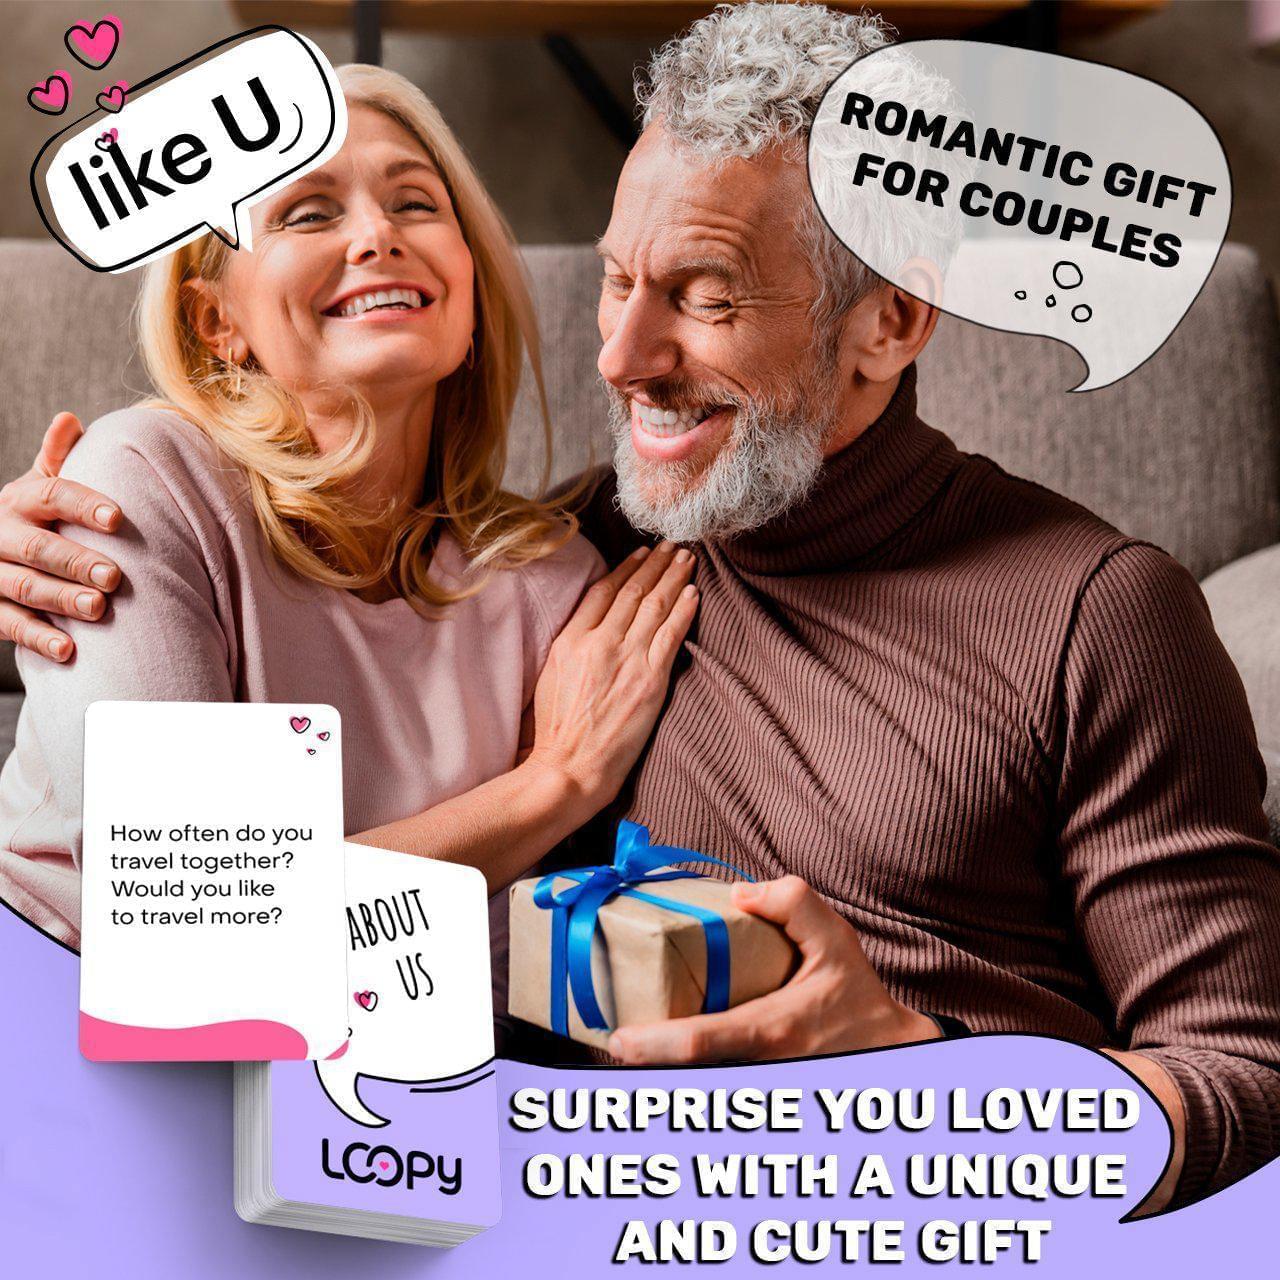 LOOPY Conversation Card Game for Couples